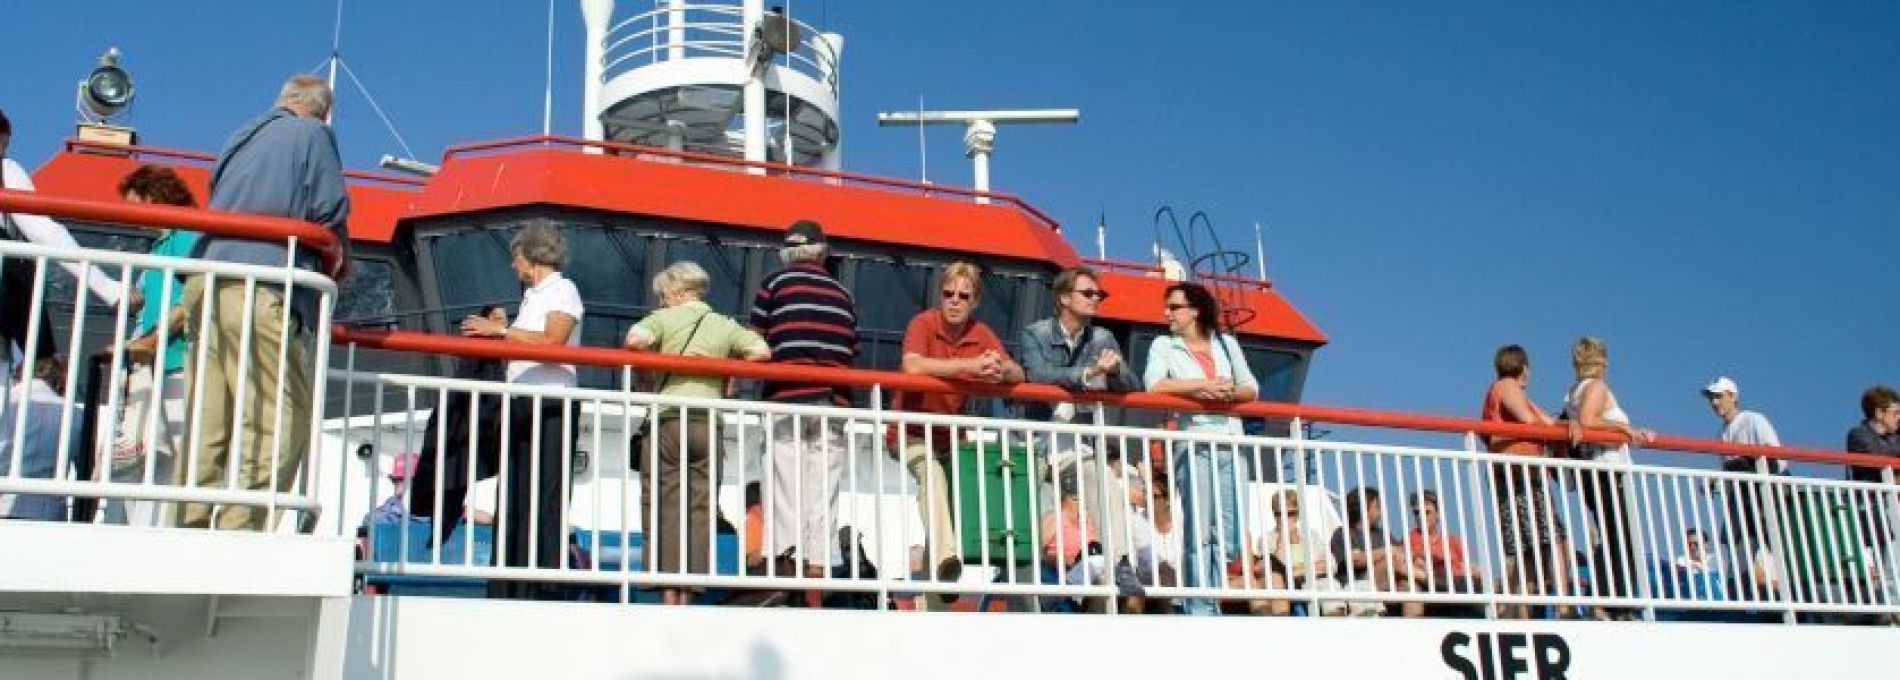 Frequently asked questions about transport to and on Ameland- Tourist Information Centre VVV Ameland.